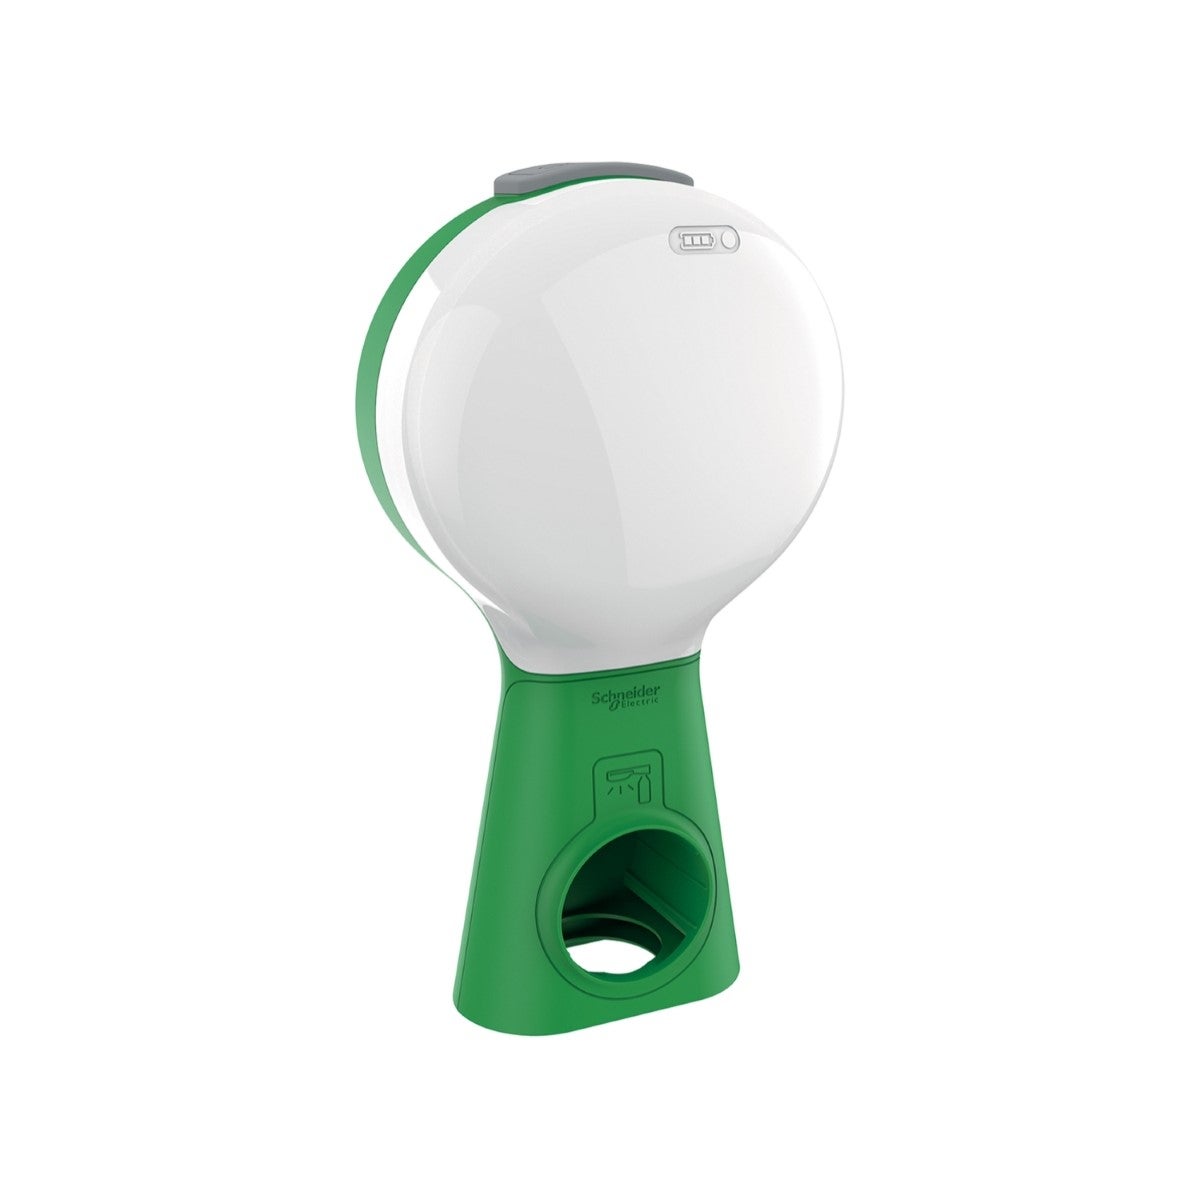 Schneider Electric Mobiya Lite, affordable, charges mobiles and versatile mounting positions